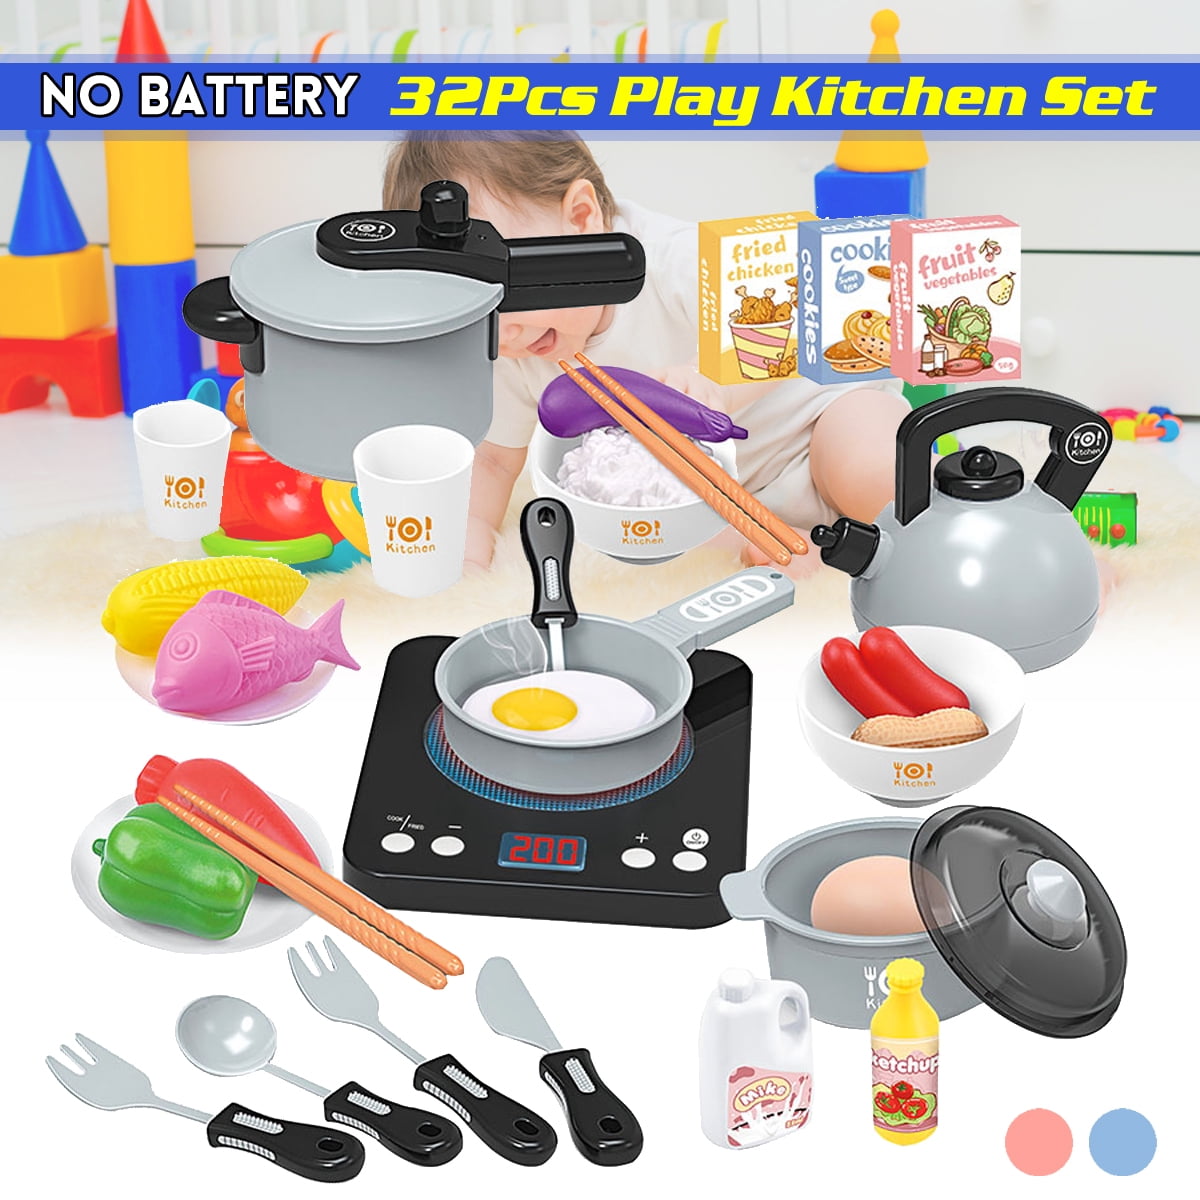 Kids Toys Pretend Cooking Playset Kitchen Toys Cookware Play Set Toddler 32pcs 